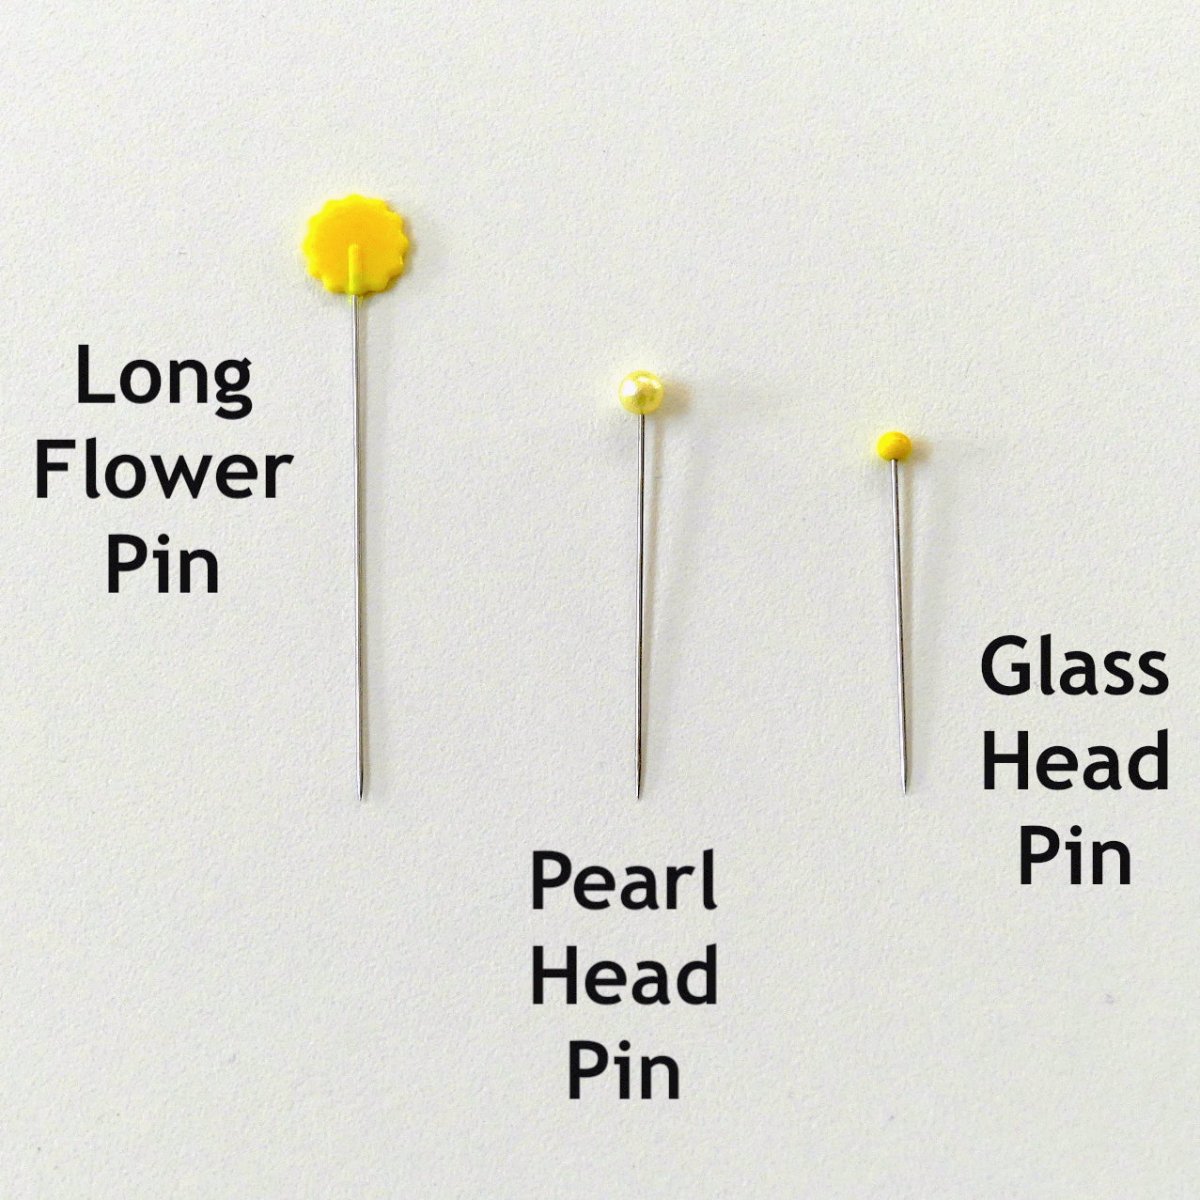 Glass Heads Straight Pins Package 100